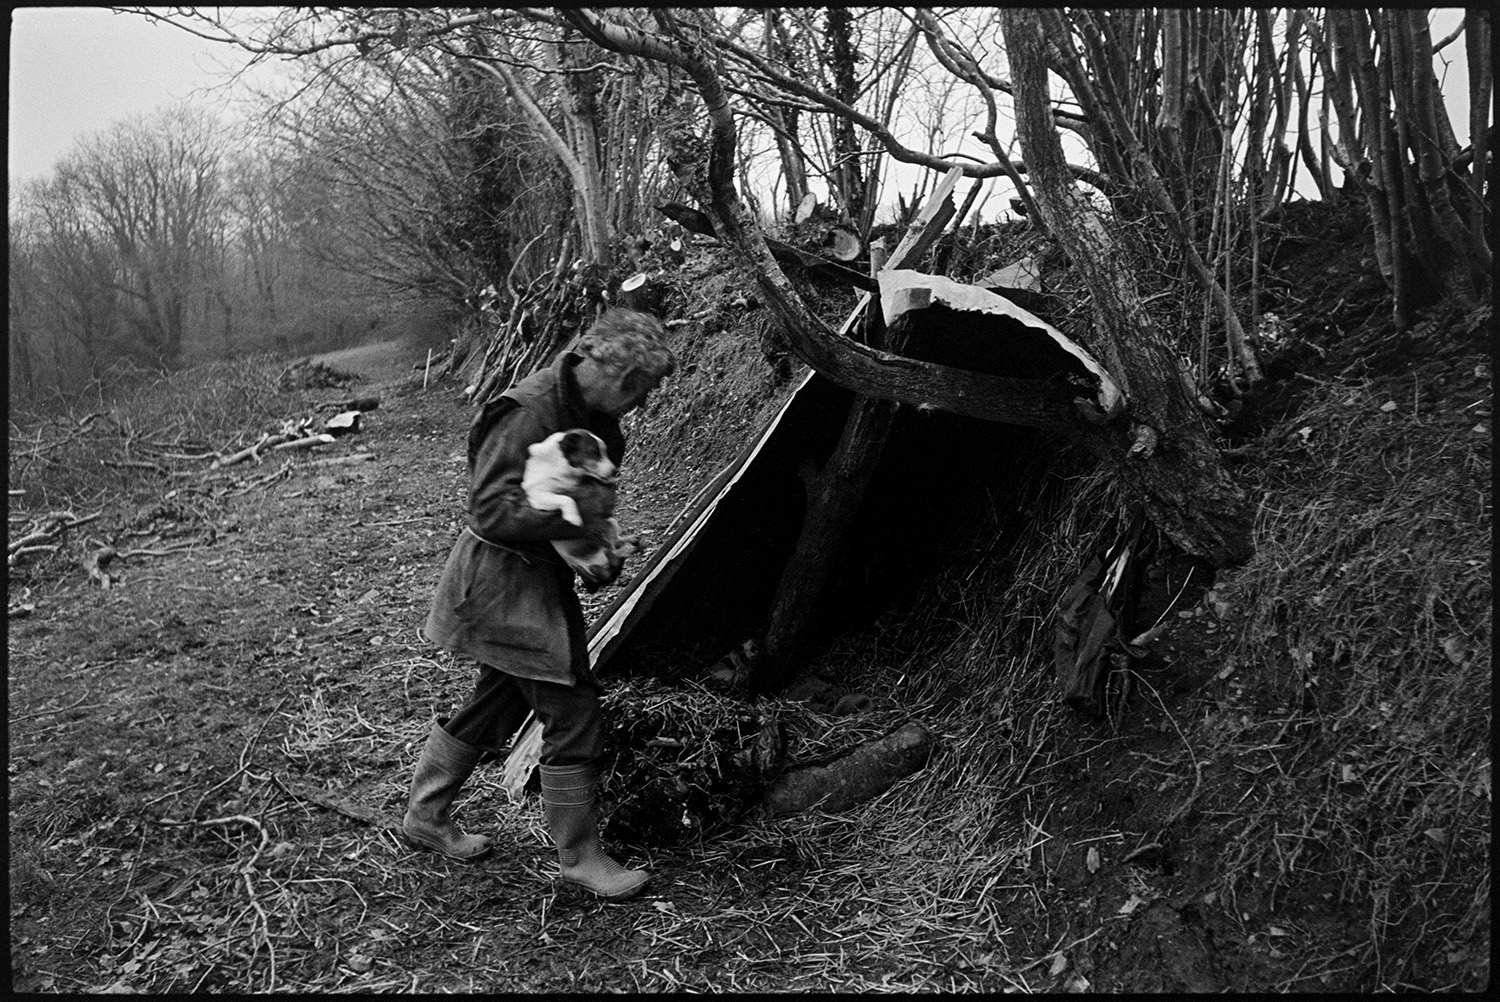 Man clatting, building up old hedgebank, sitting in shelter with dog. 
[Fred Moule carrying a dog and walking into a shelter he has made, by propping a sheet of corrugated iron against the hedge, in a field at Woolridge, Dolton. He has been clatting or building up the hedgerow. Various logs and branches from the hedge are on the ground nearby.]